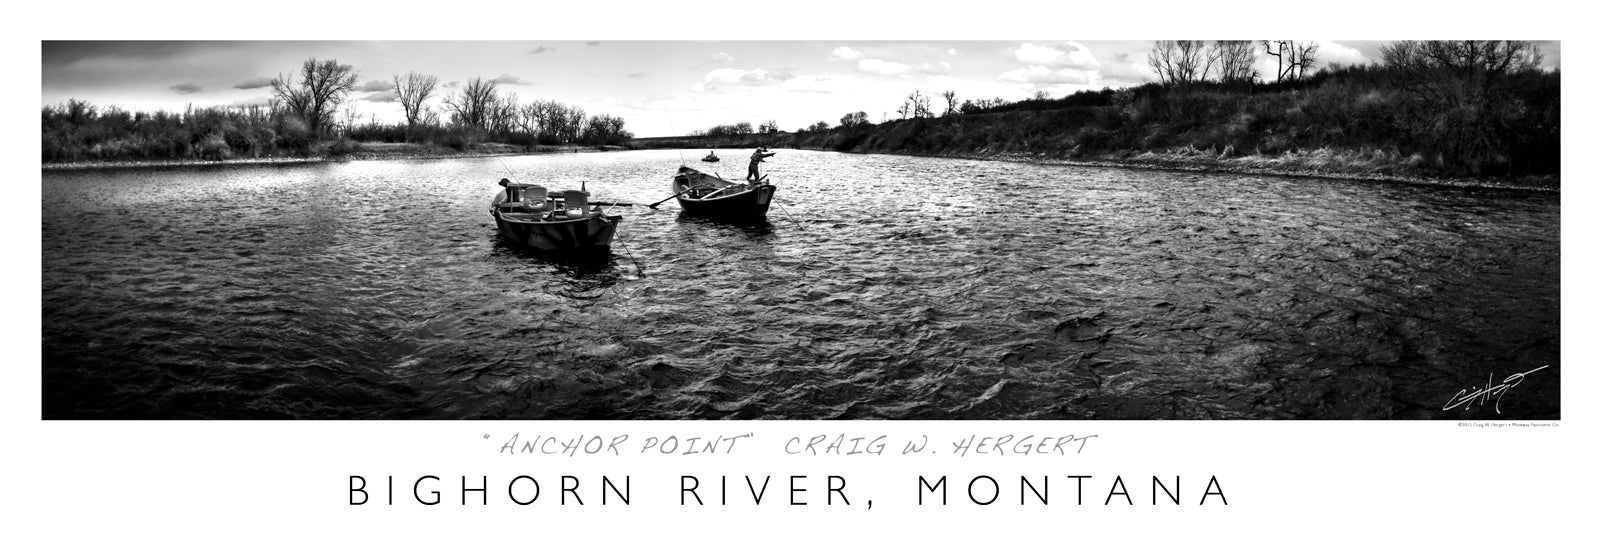 "Anchor Point" - Bighorn River, MT - POSTER